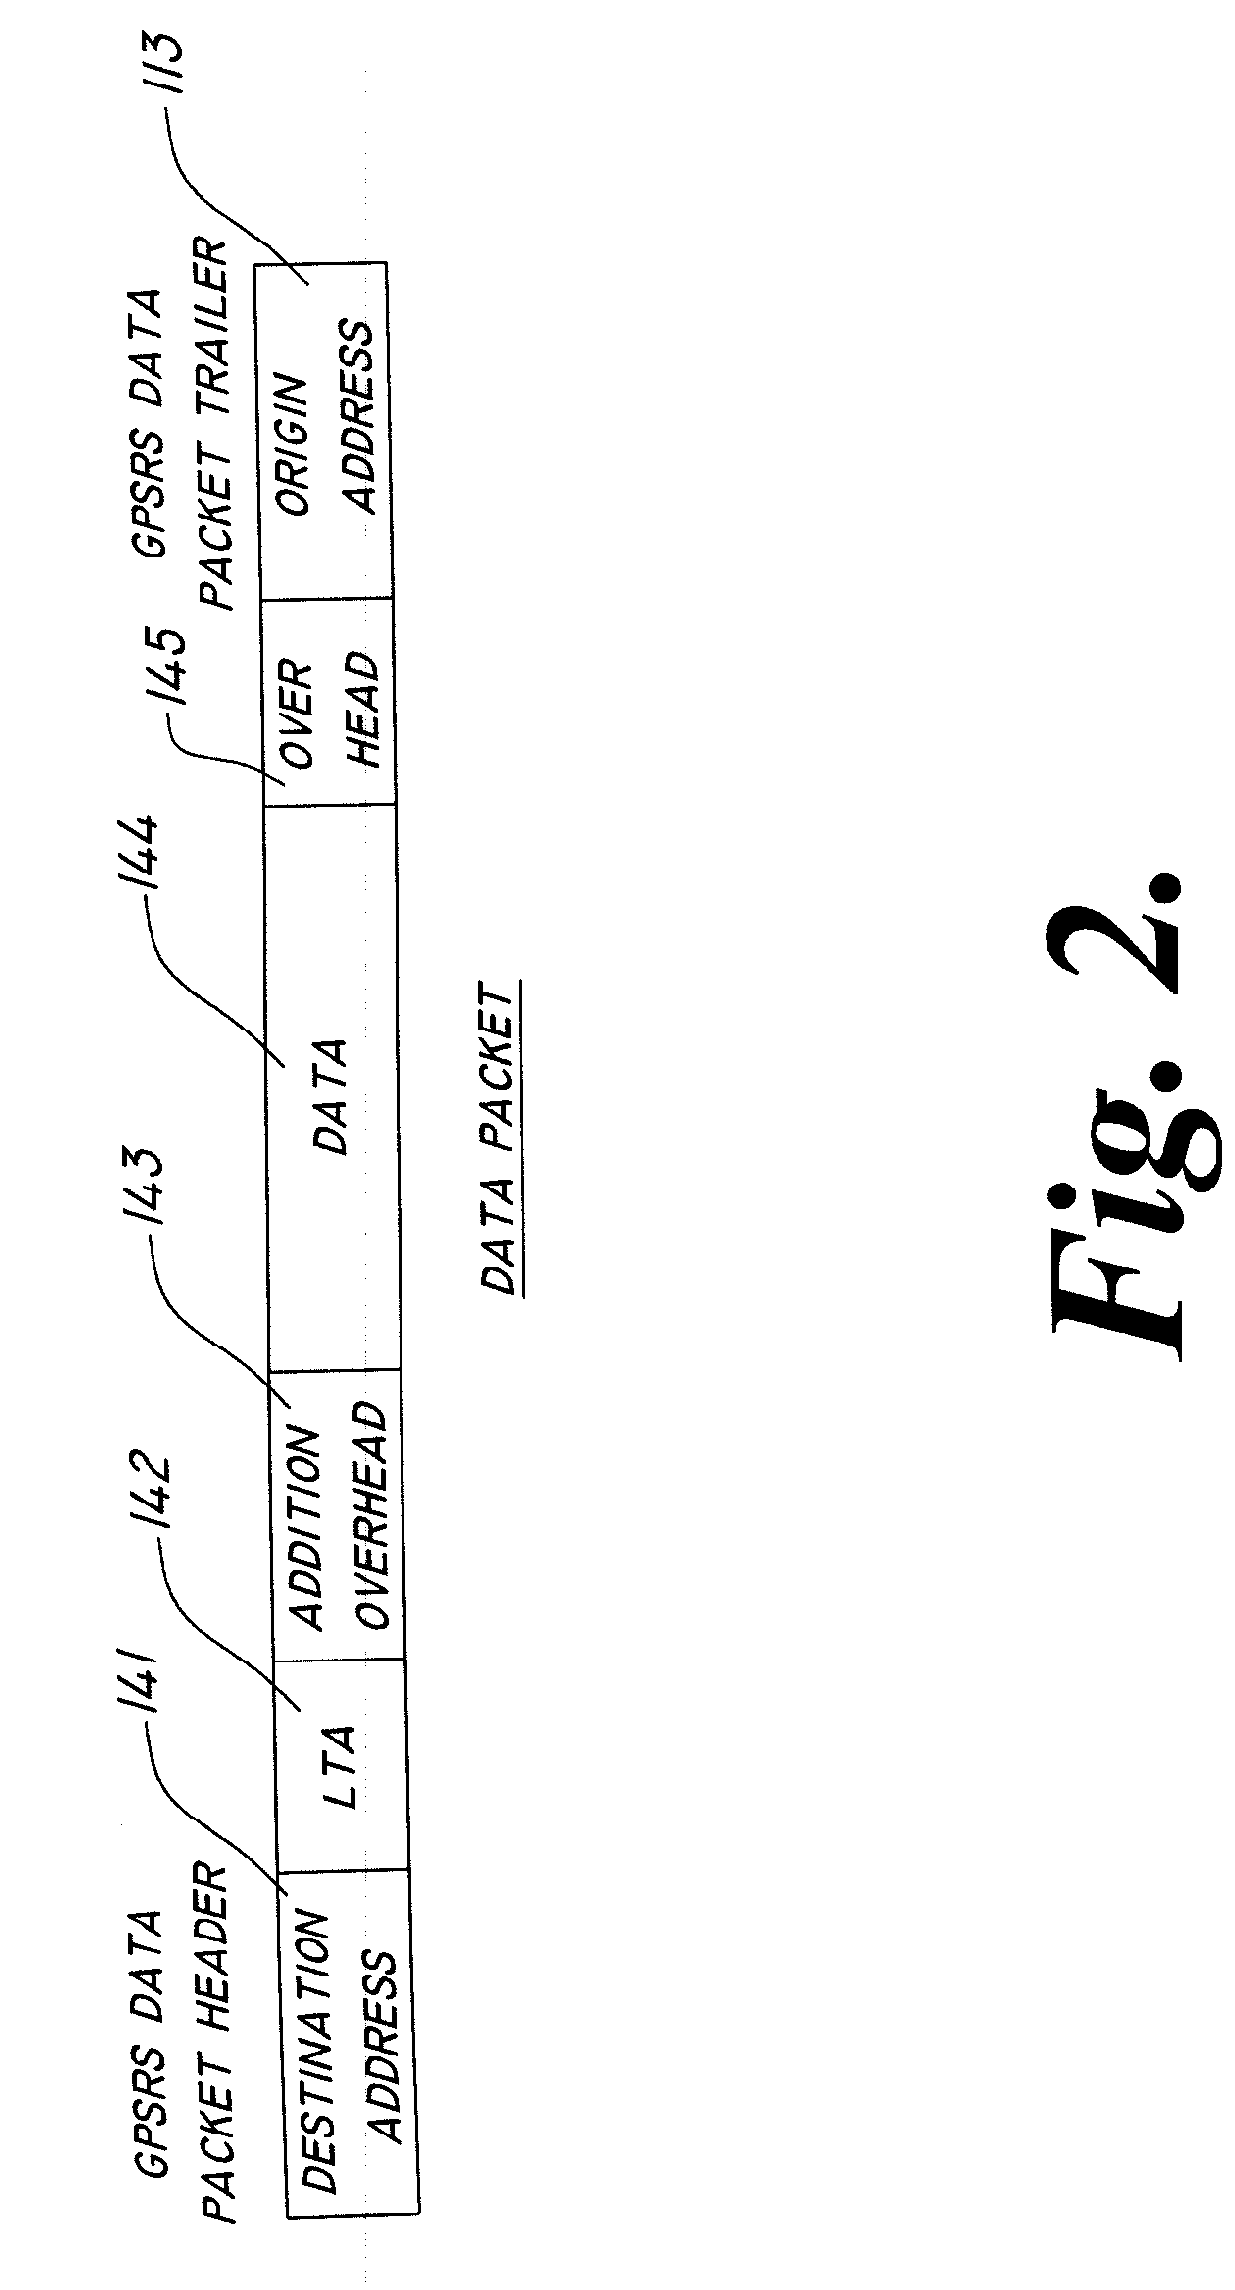 LED light global positioning and routing communication system